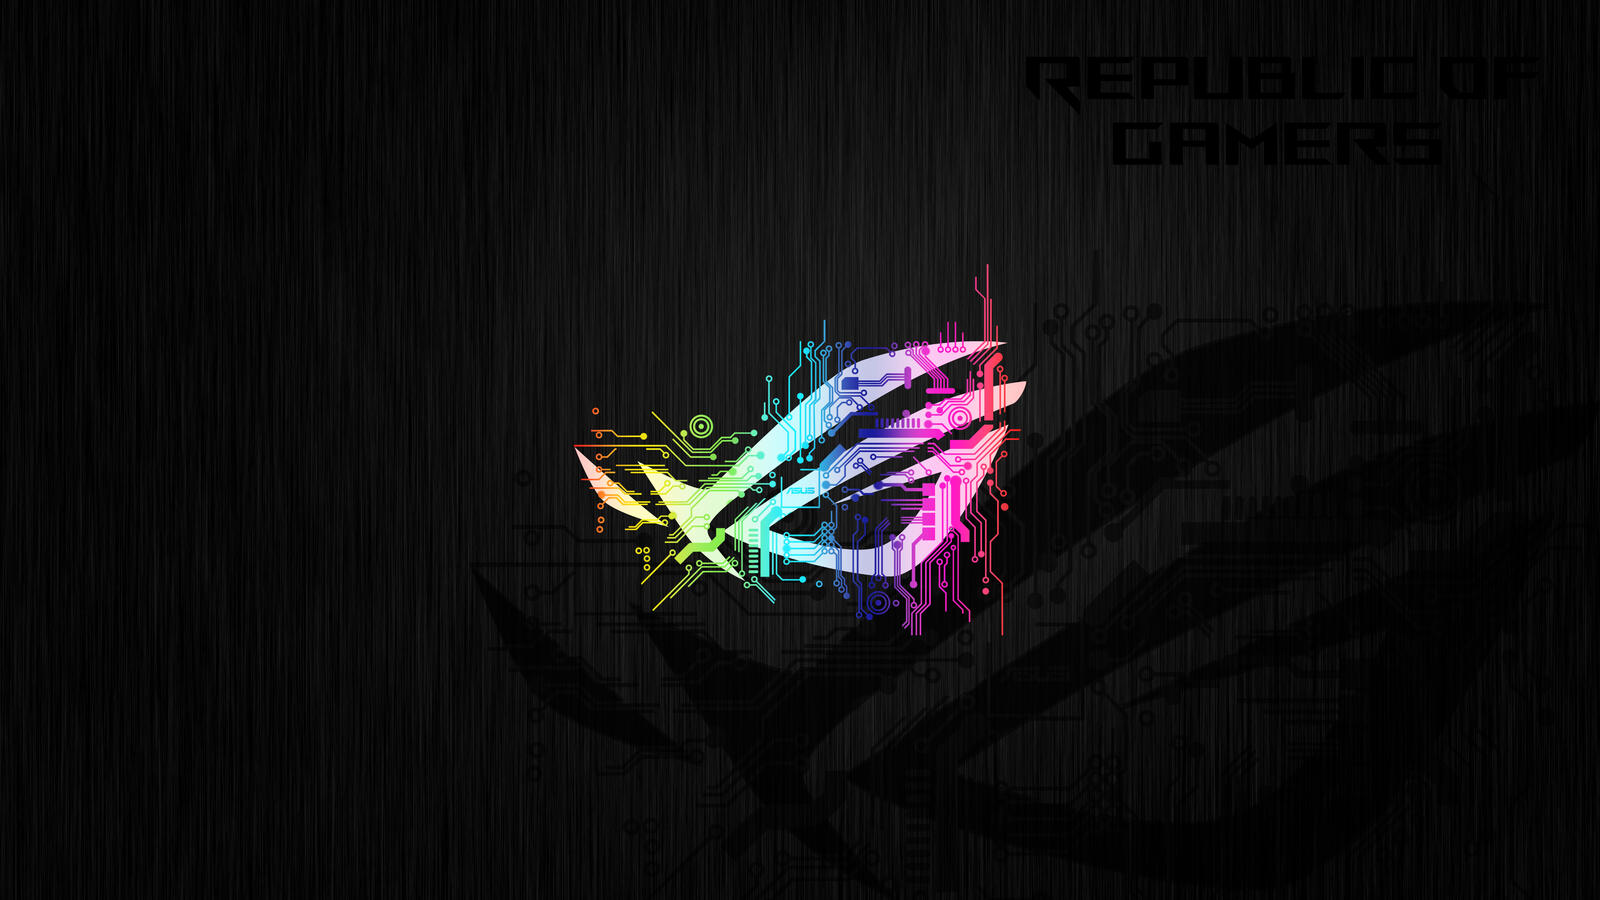 Wallpapers republic of gamers Asus computers on the desktop